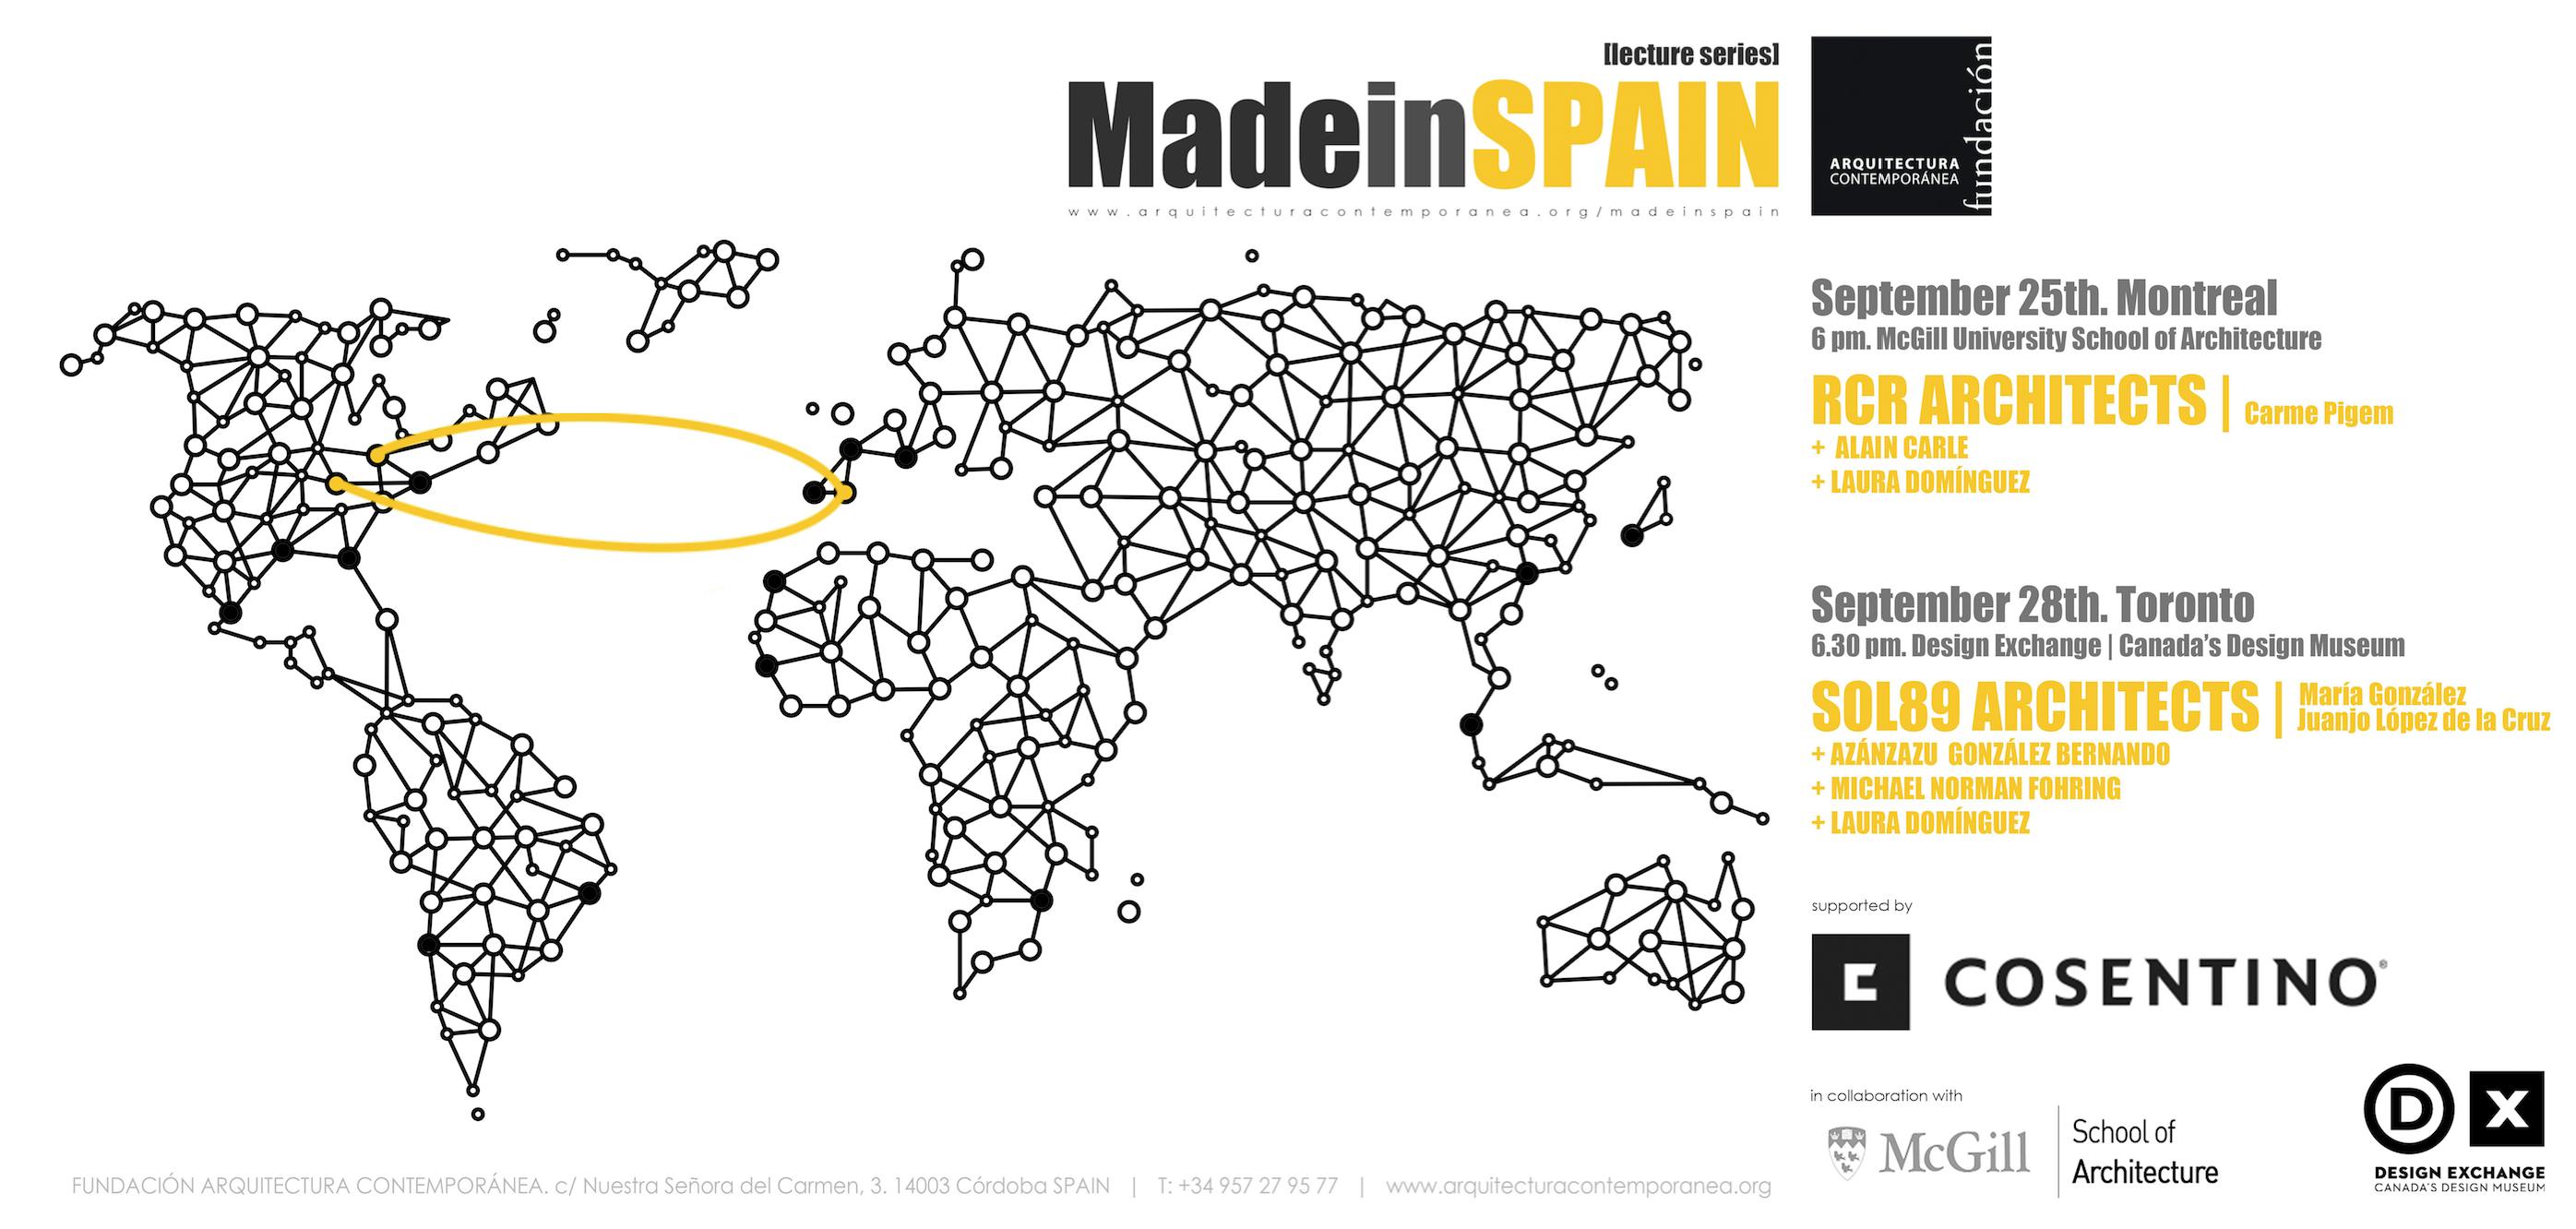 Image number 32 of the current section of Cosentino Group sponsors ‘Made in Spain’ international lecture series in Montreal & Toronto in Cosentino Canada